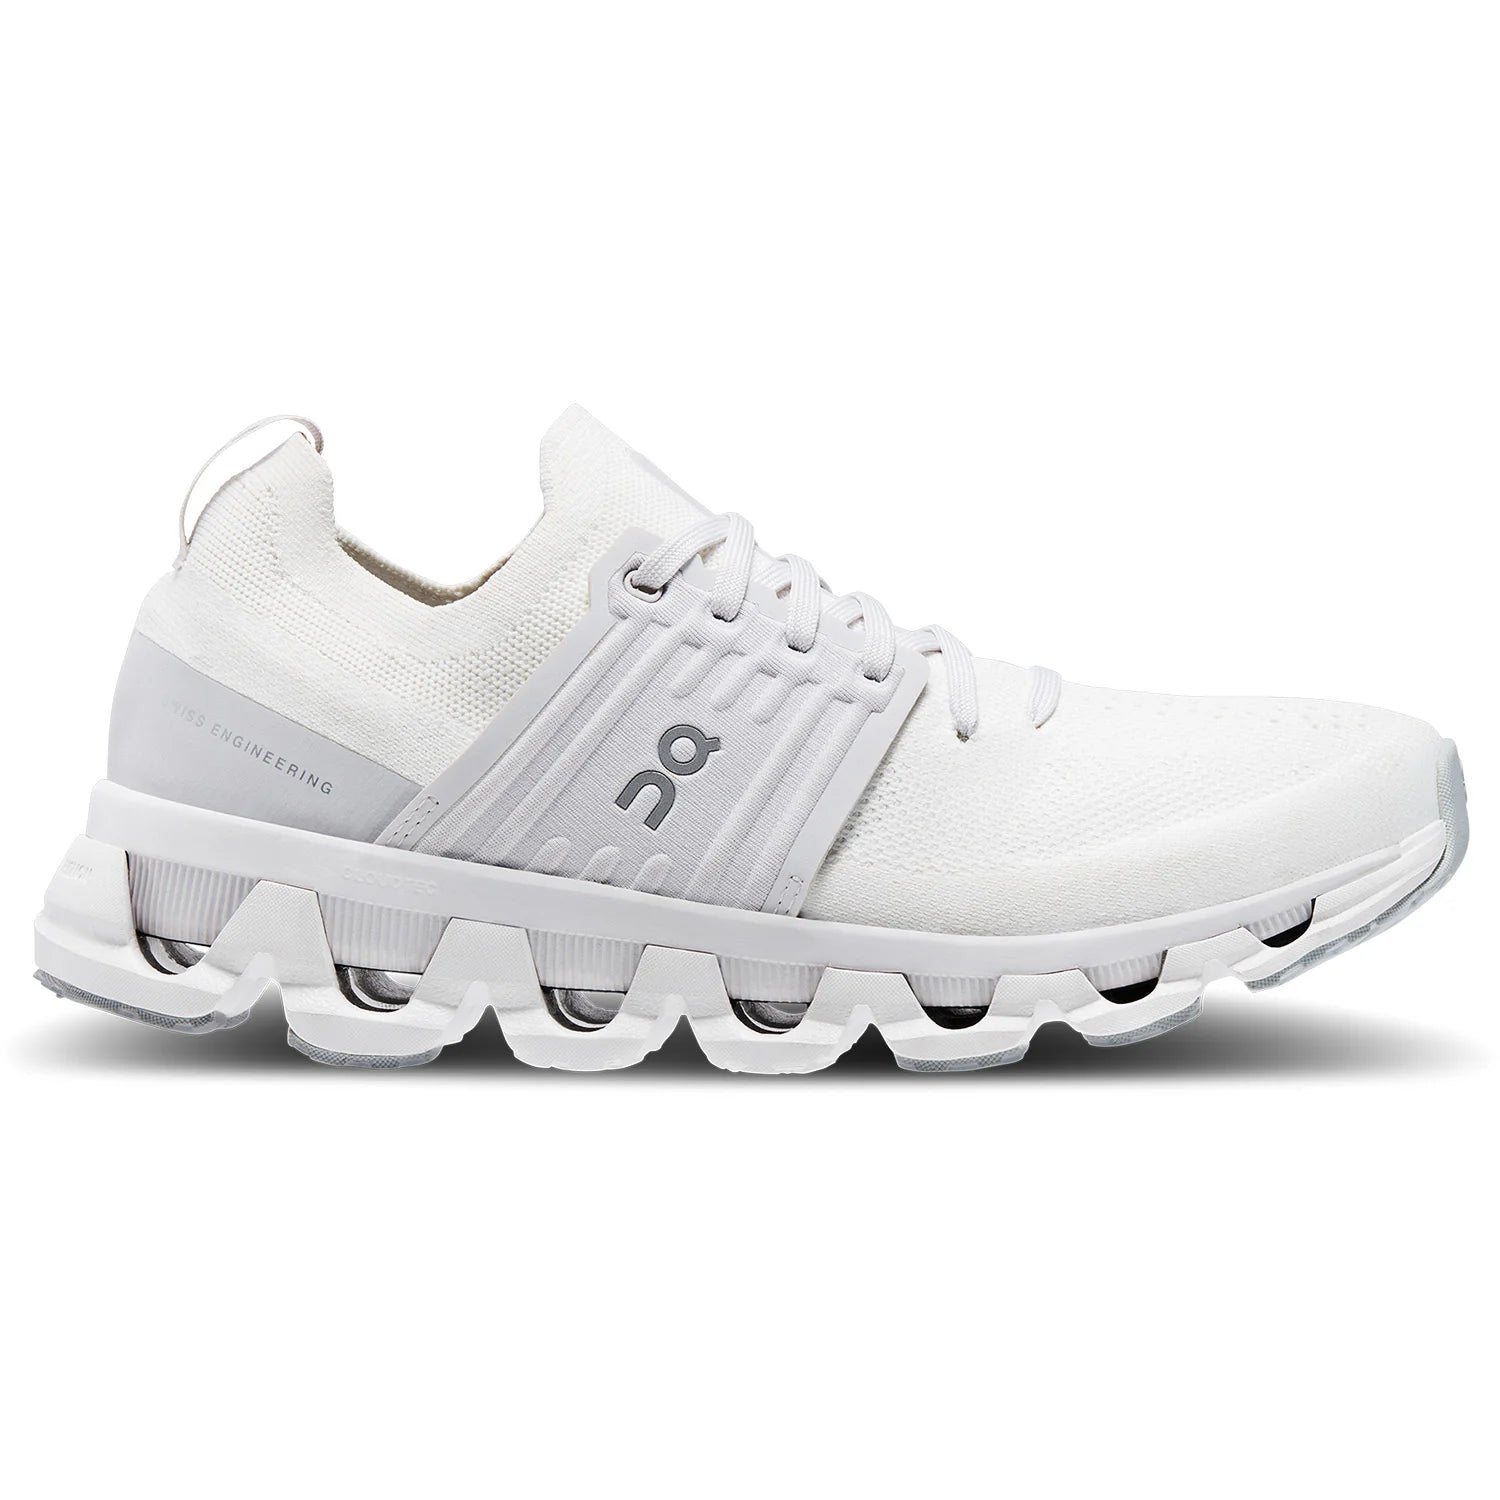 Lateral view of the Women's Cloudswift 3 by ON in all white